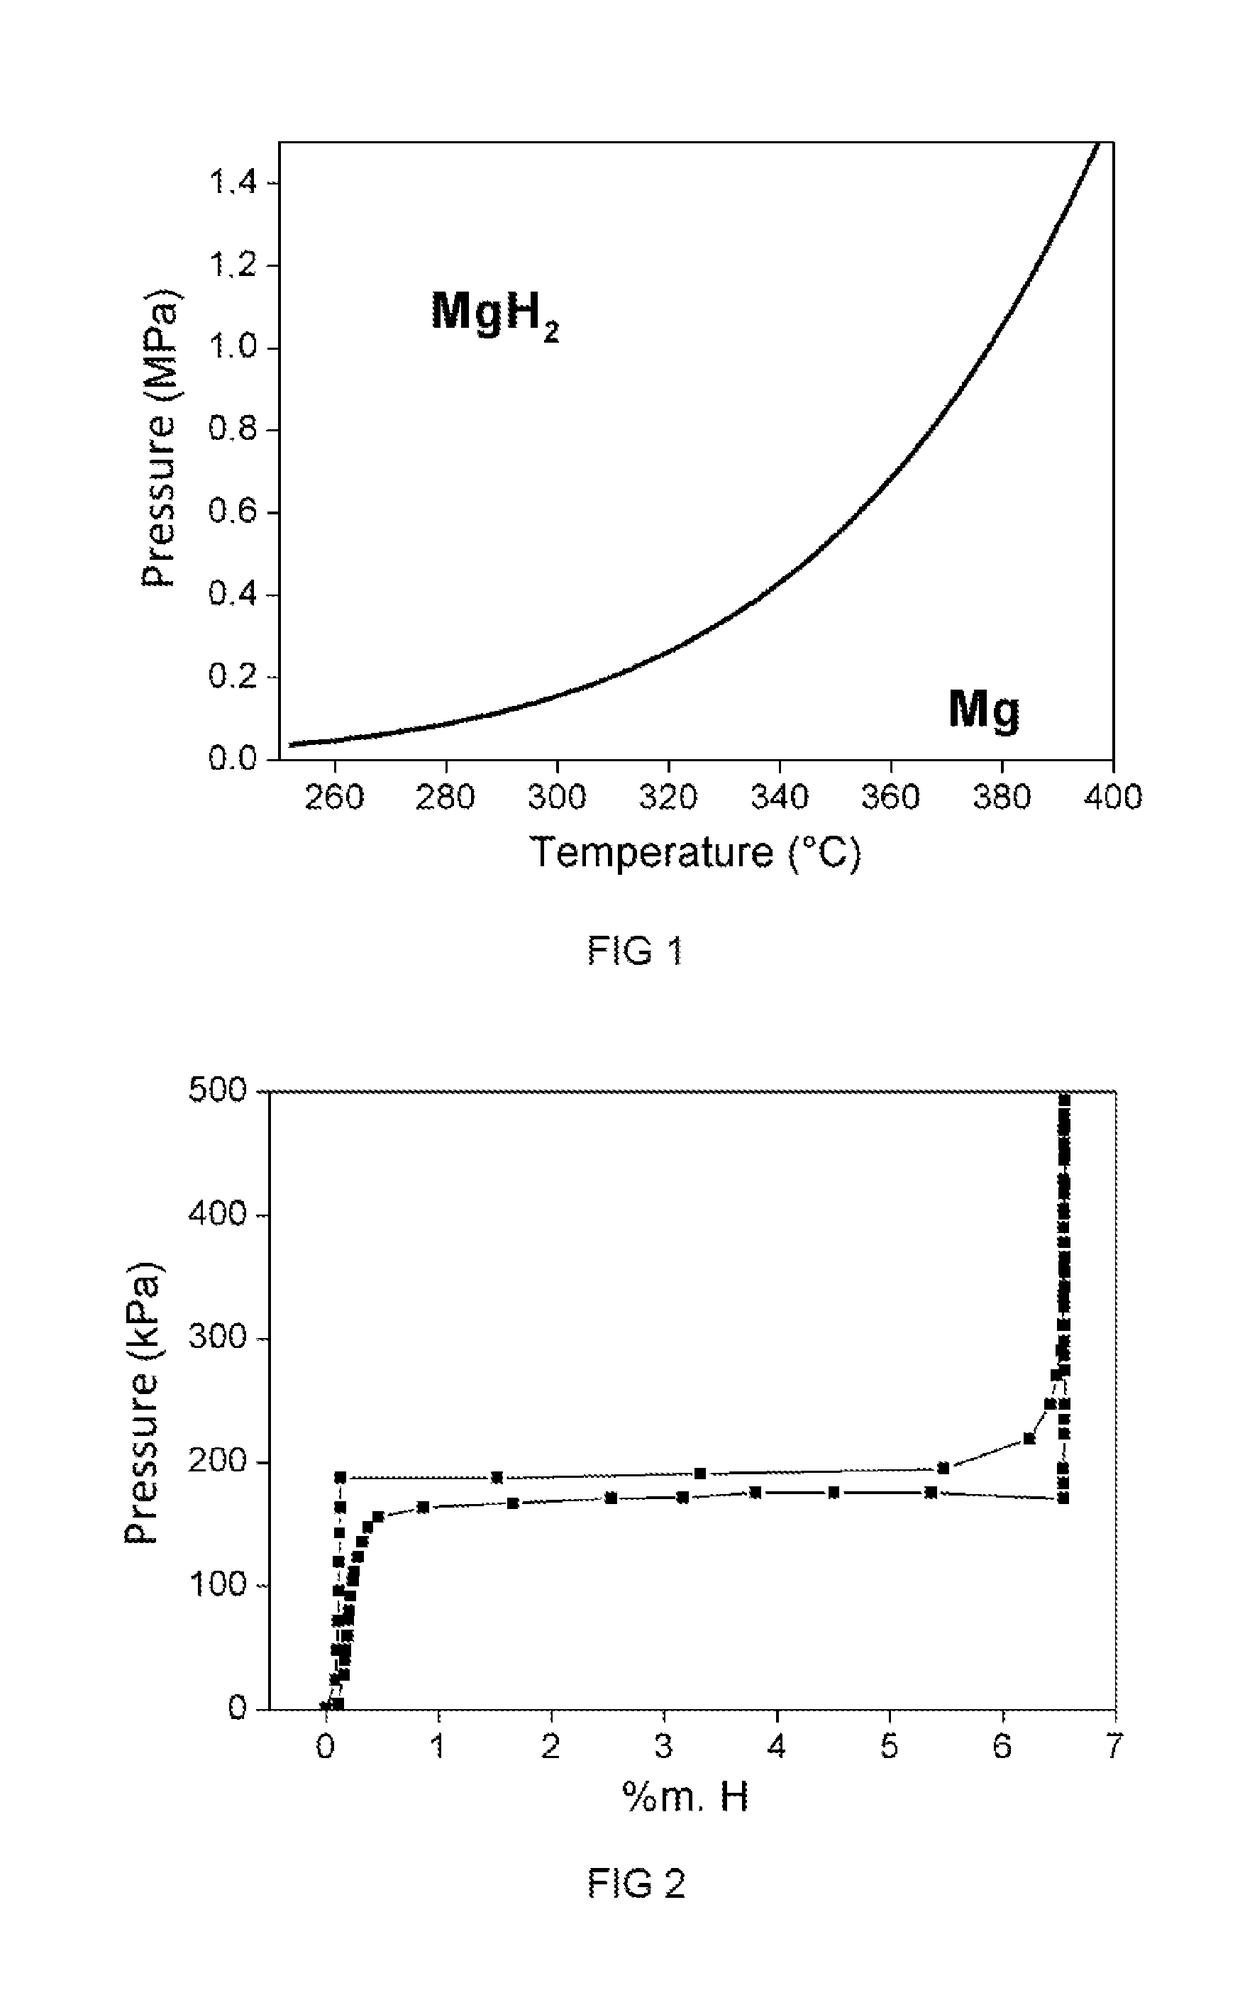 Regeneration of a hydrogen impurity trap using the heat exiting a hydride tank